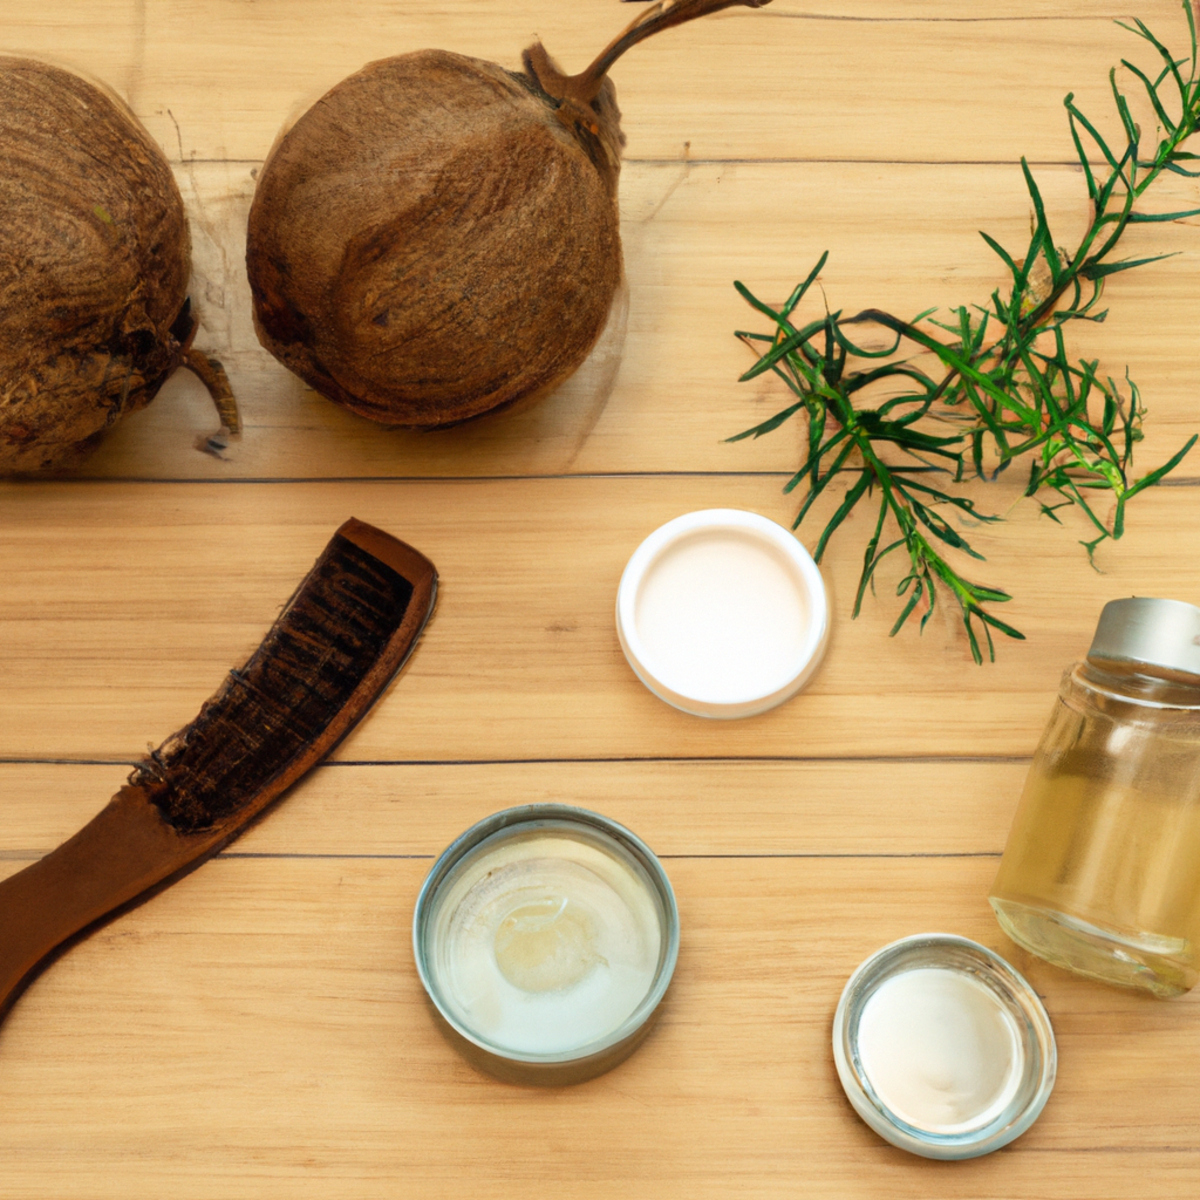 How to promote hair growth naturally - A wooden table with hair care items: coconut oil, rosemary essential oil, a wooden comb, flaxseed gel, and fresh rosemary.